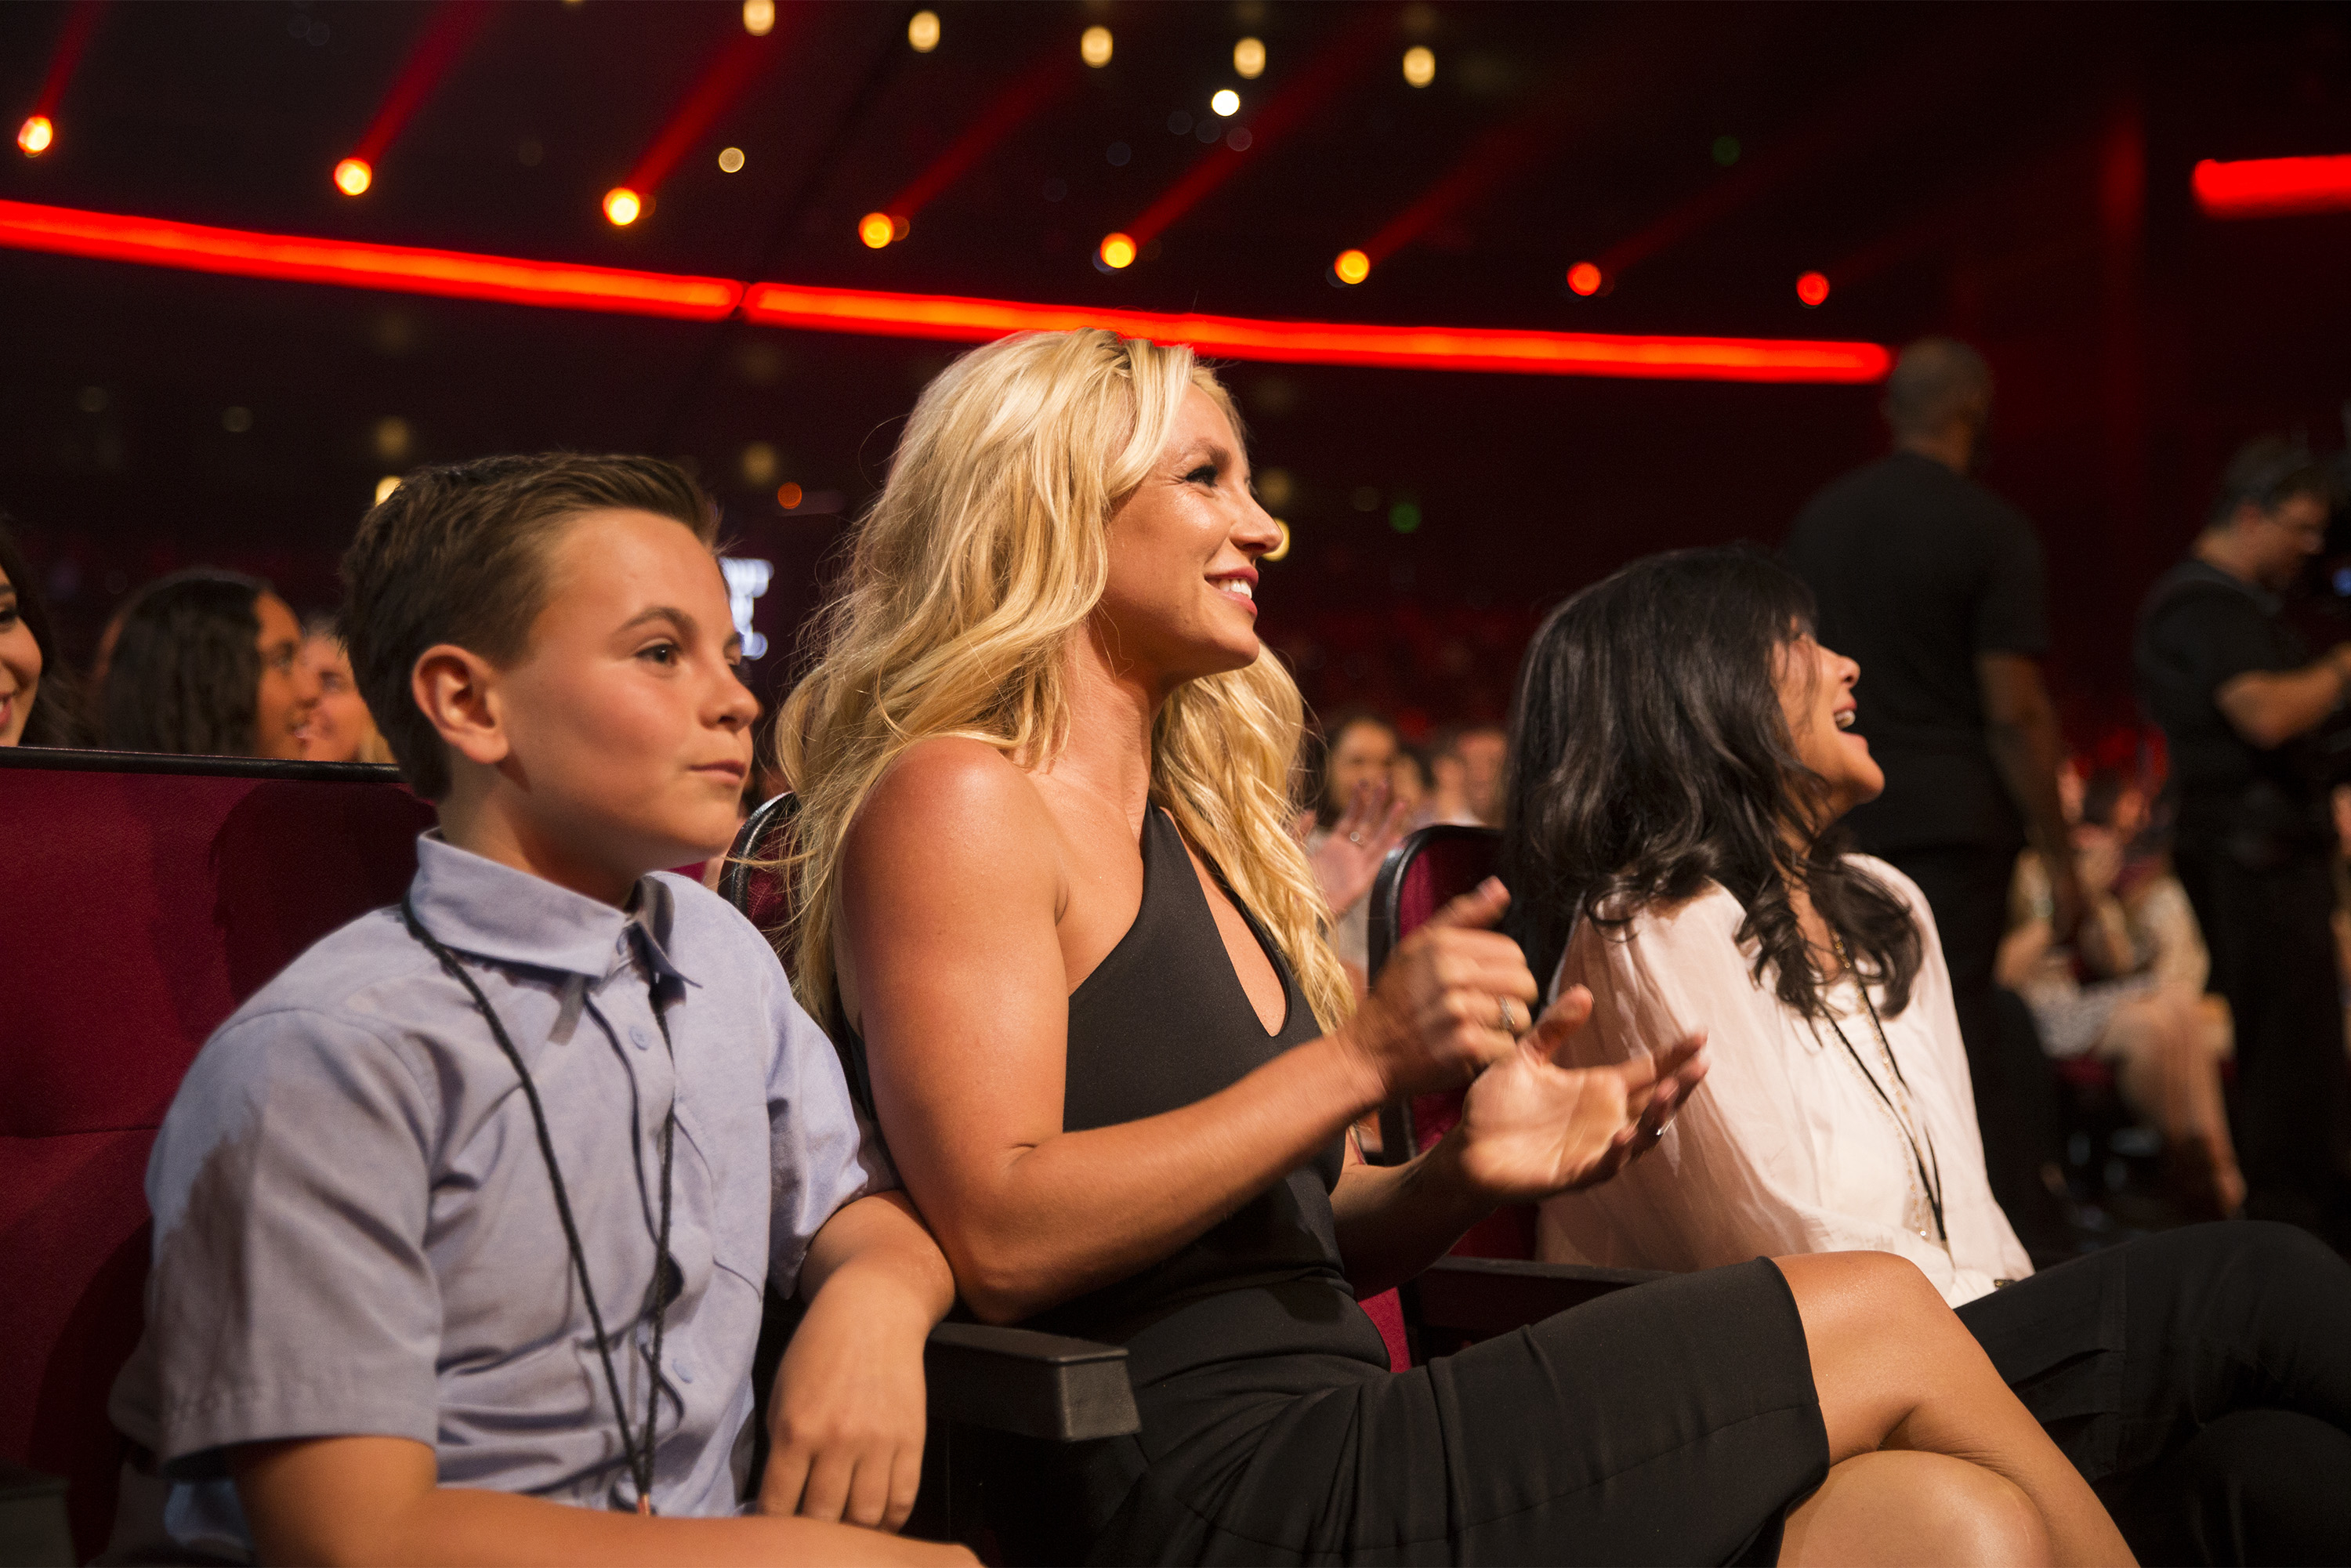 britney clapping in the audience